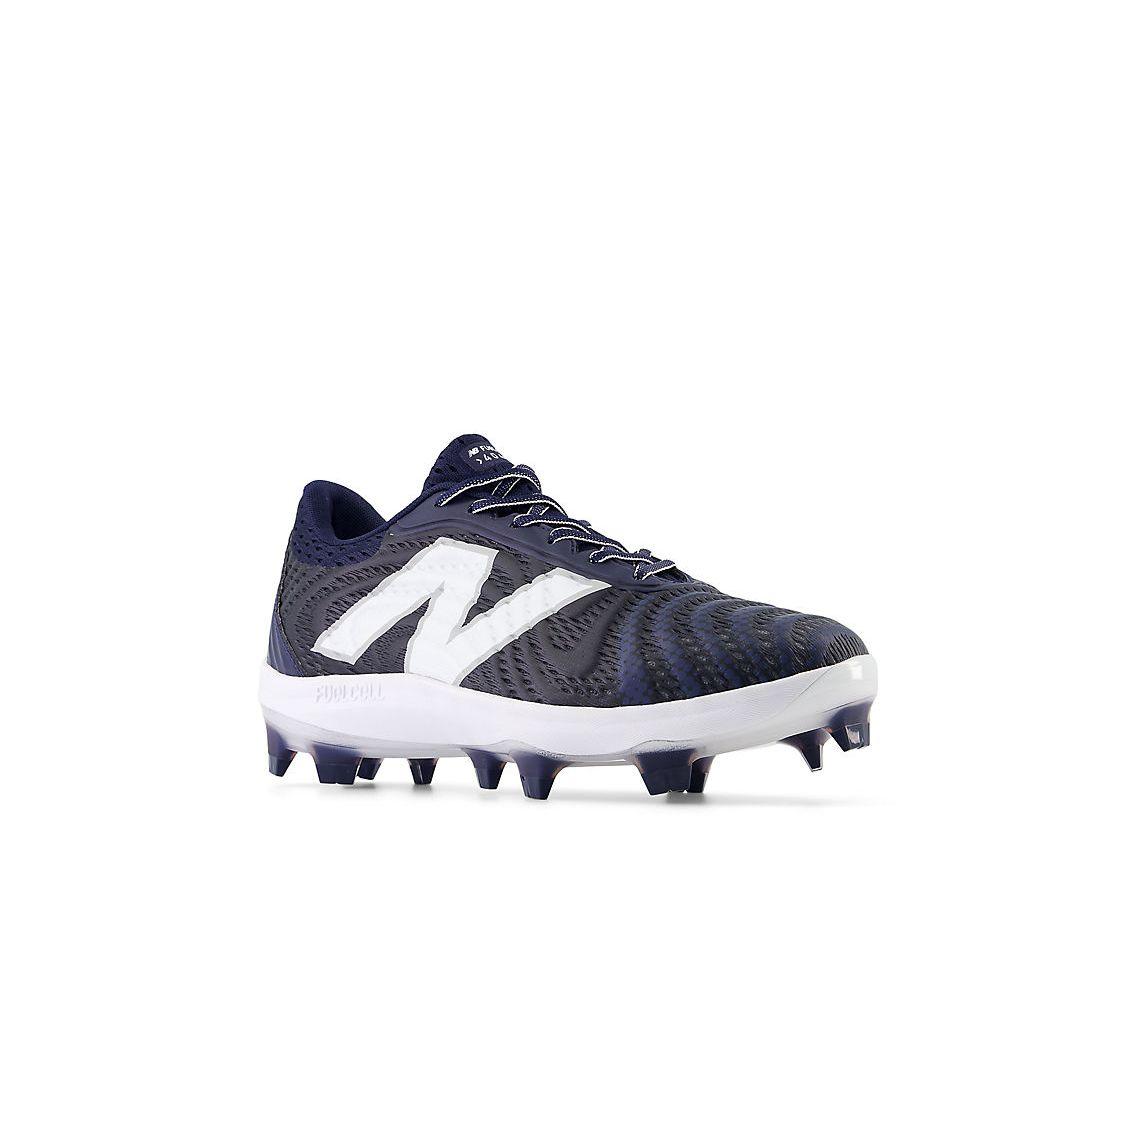 New Balance Men's FuelCell 4040 V7 Molded Baseball Cleats - Team Navy / Optic White - PL4040N7 - Smash It Sports